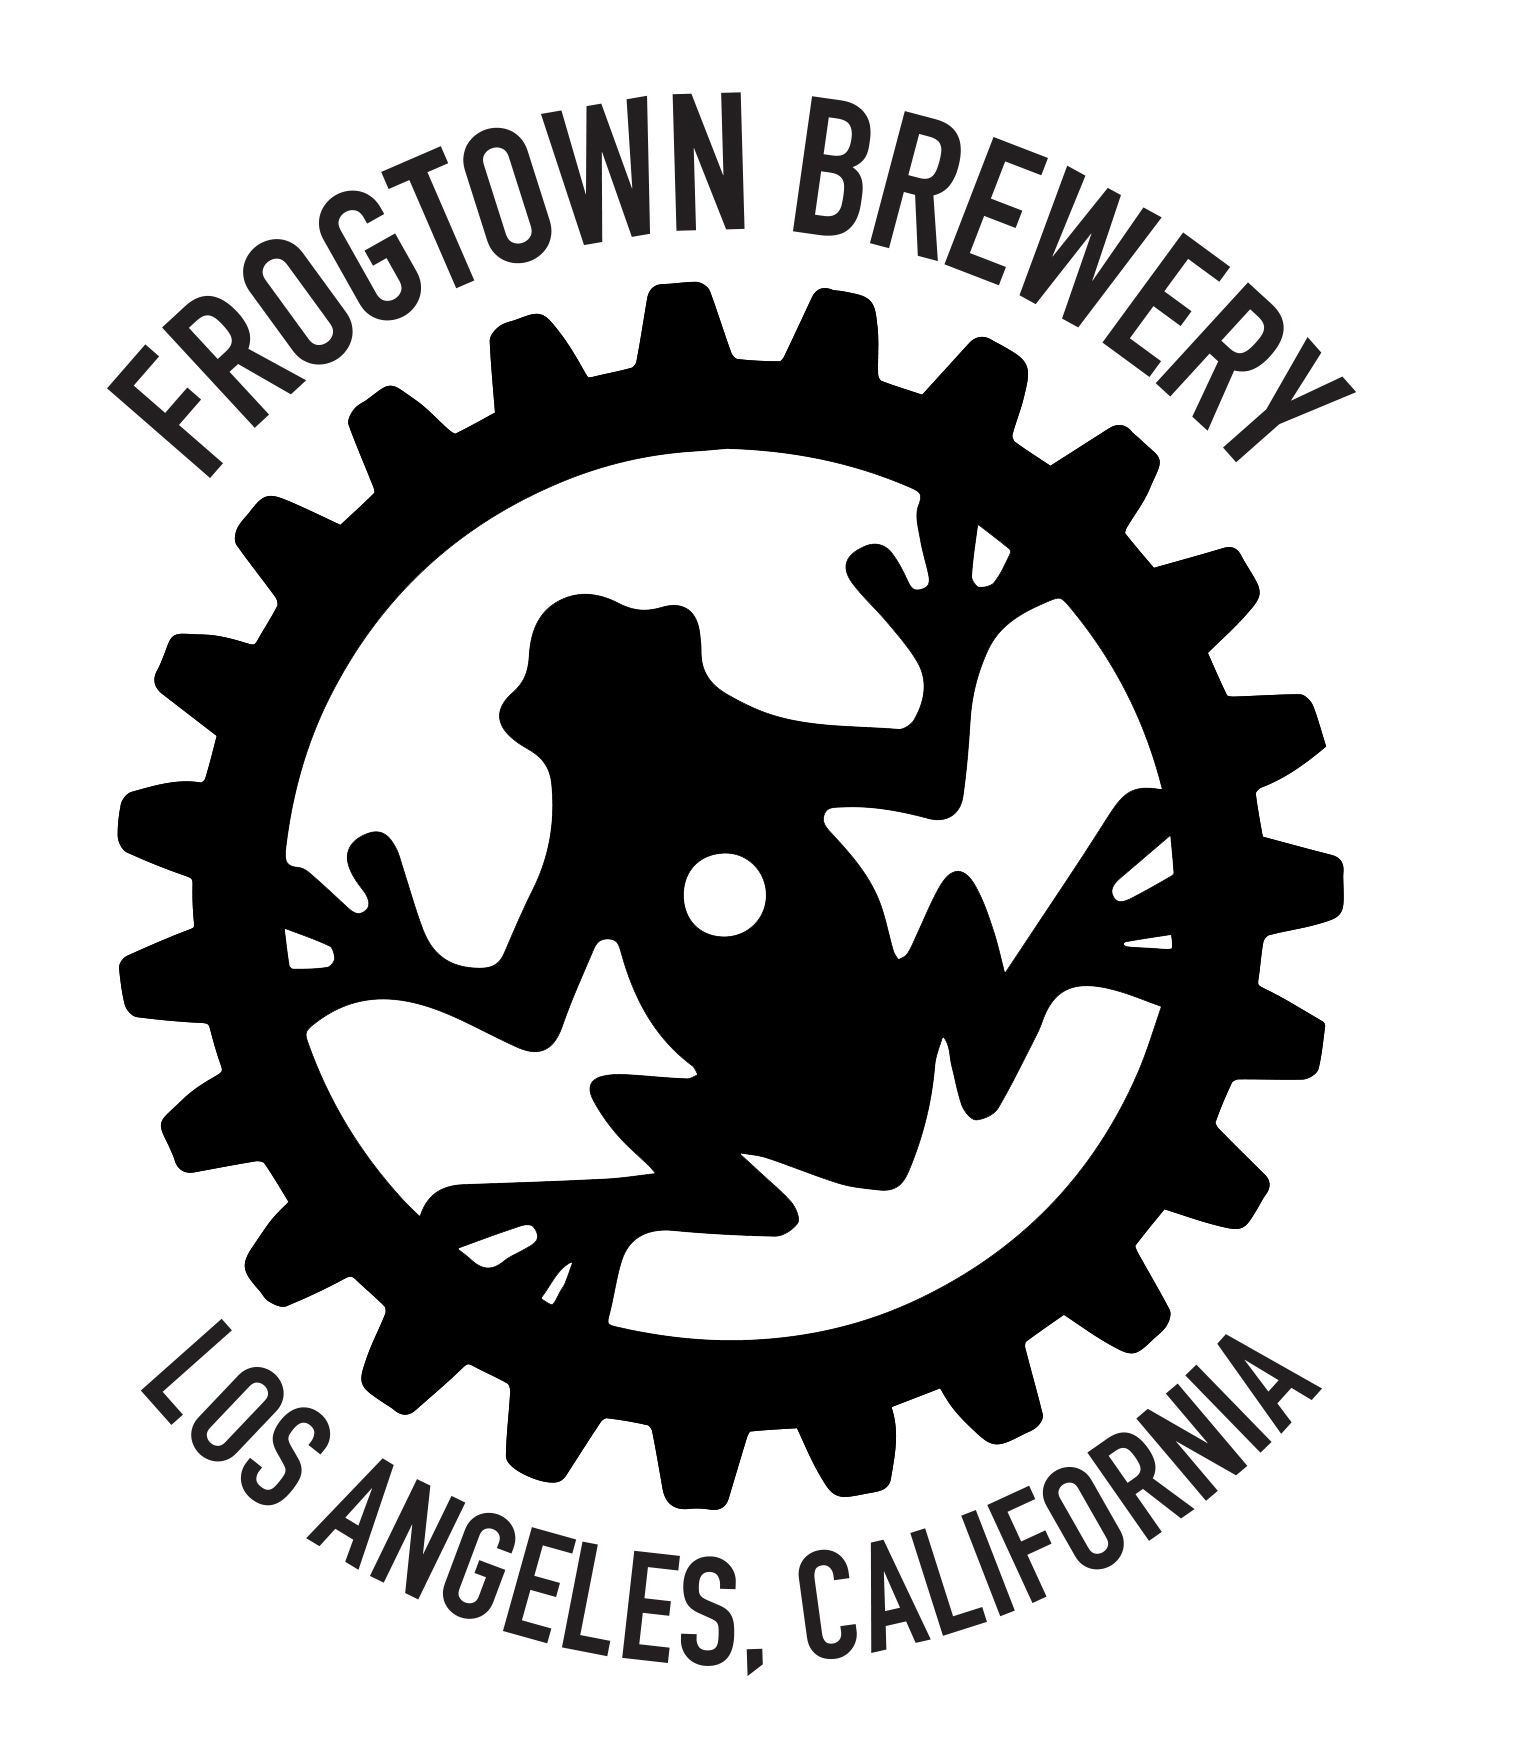 Frogtown Brewery